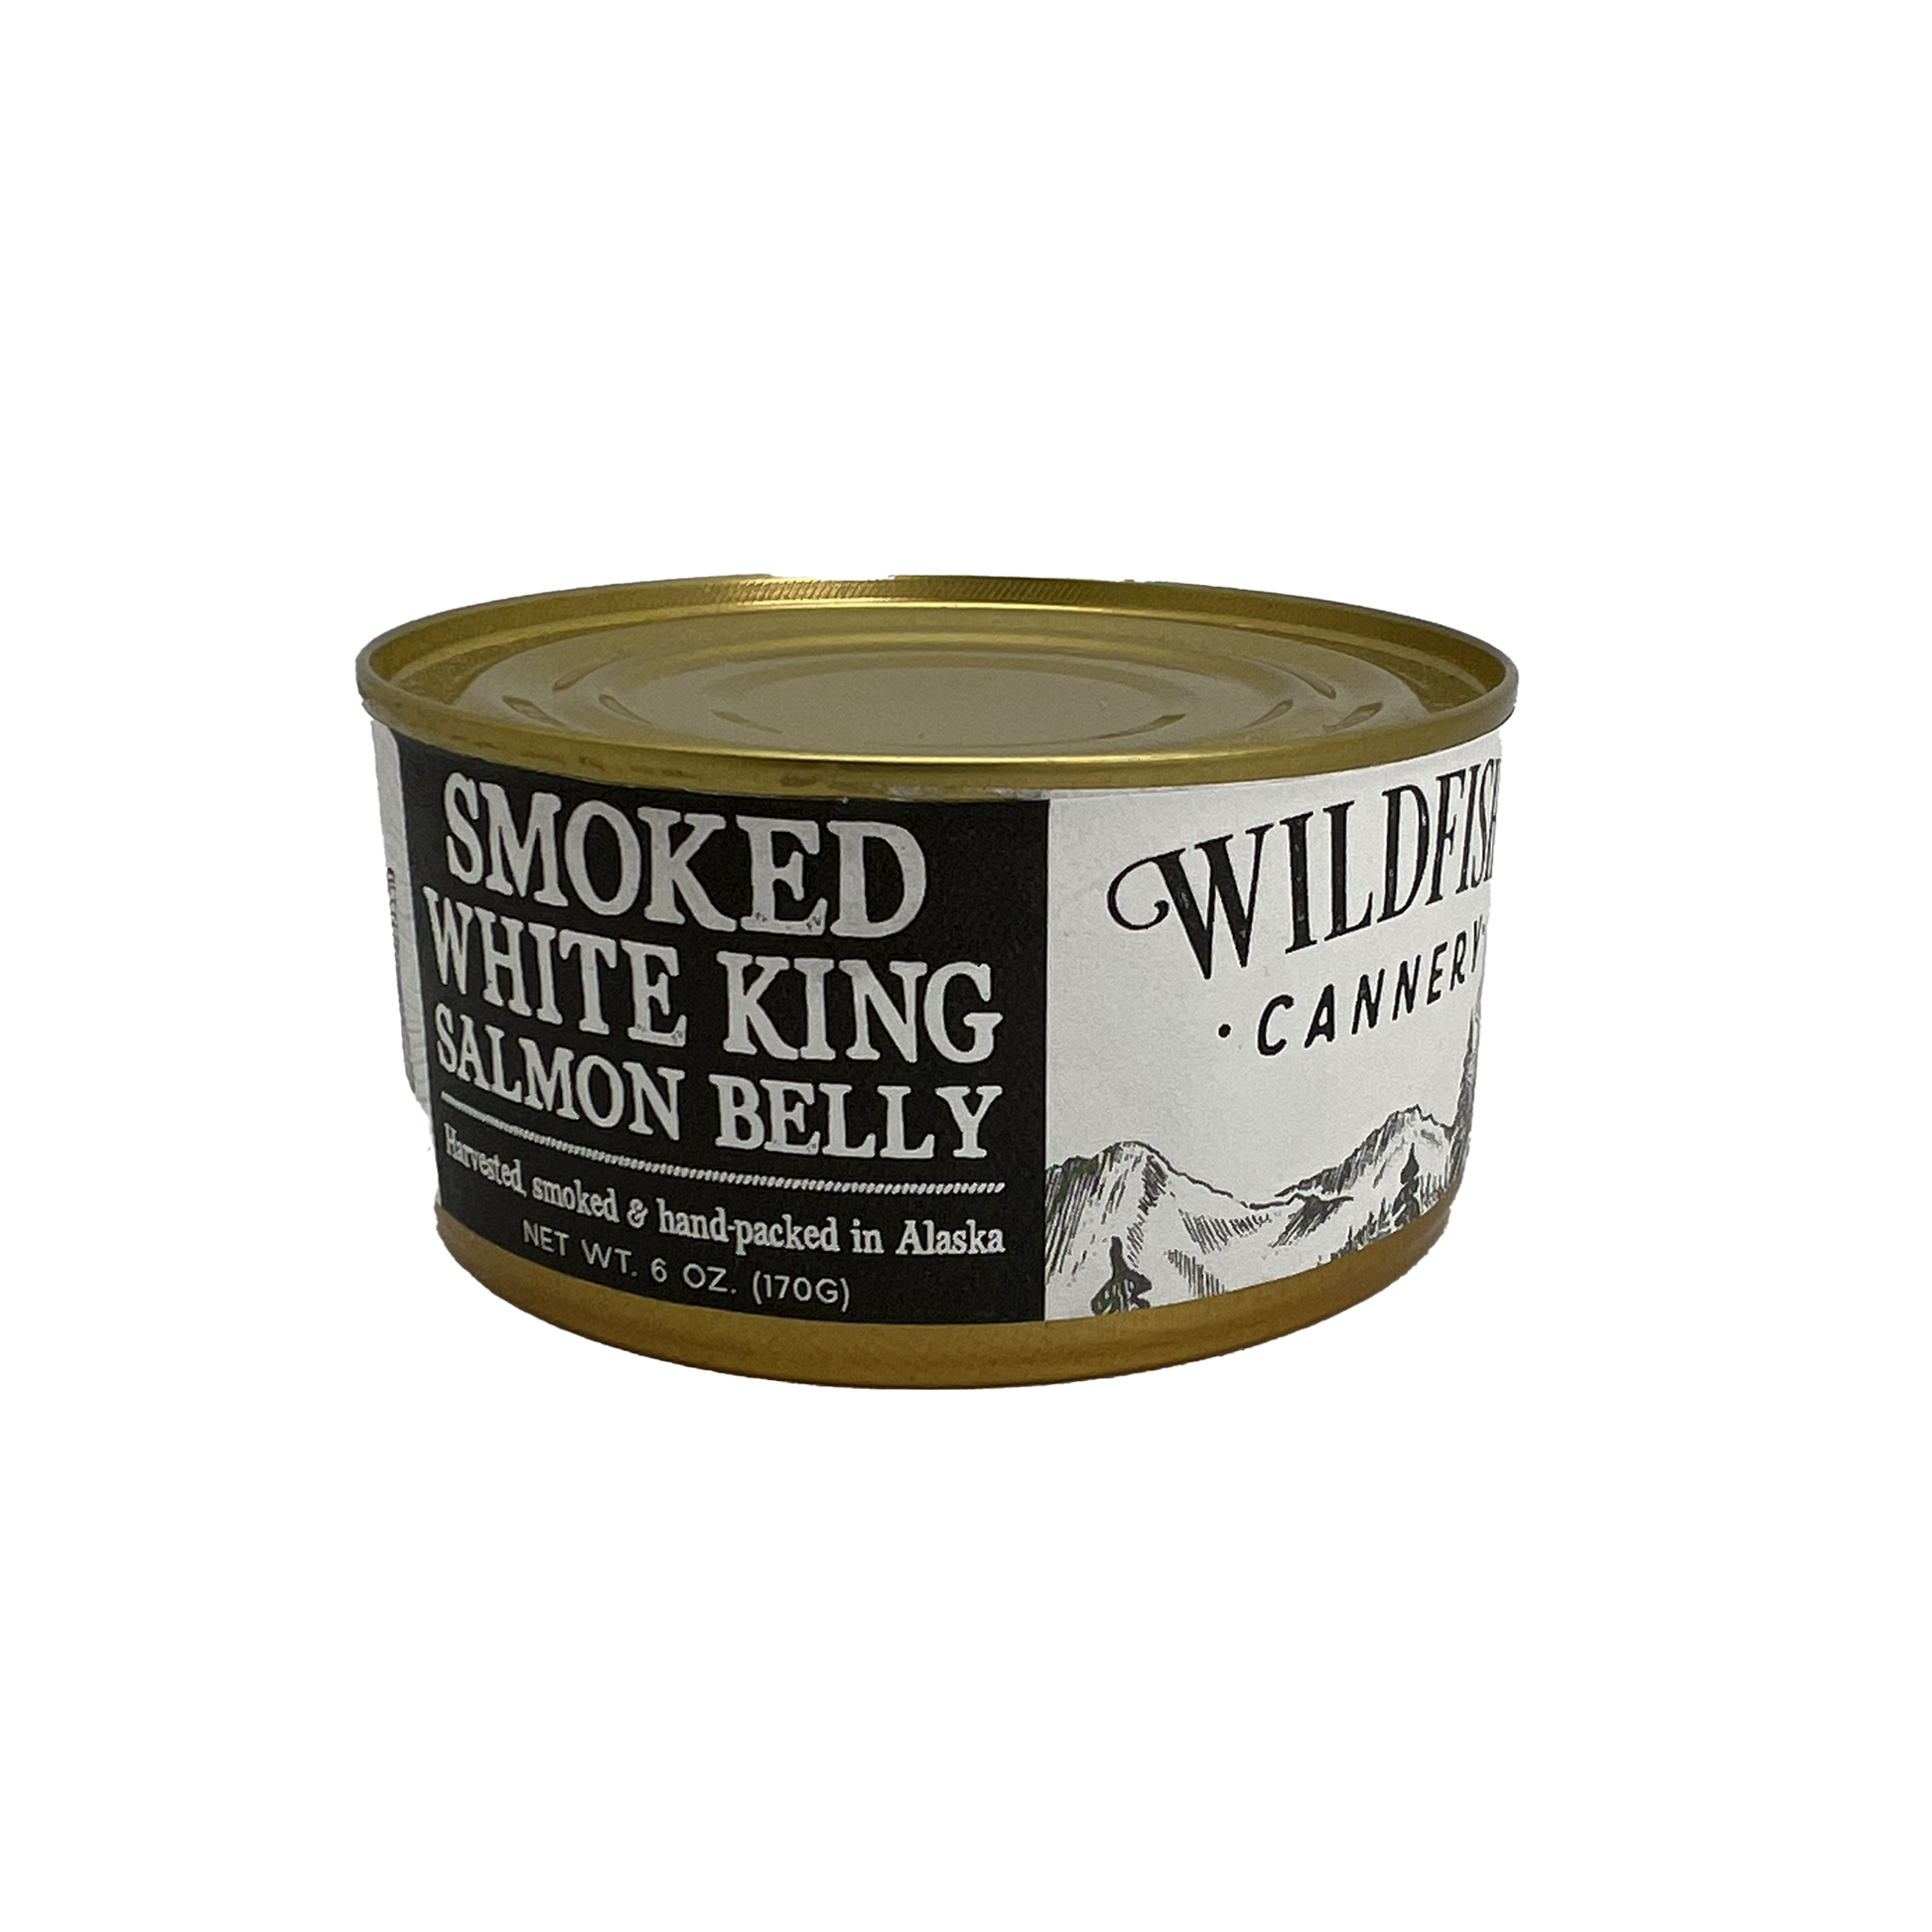 WILDFISH CANNERY SMOKED WHITE KING SALMON BELLY